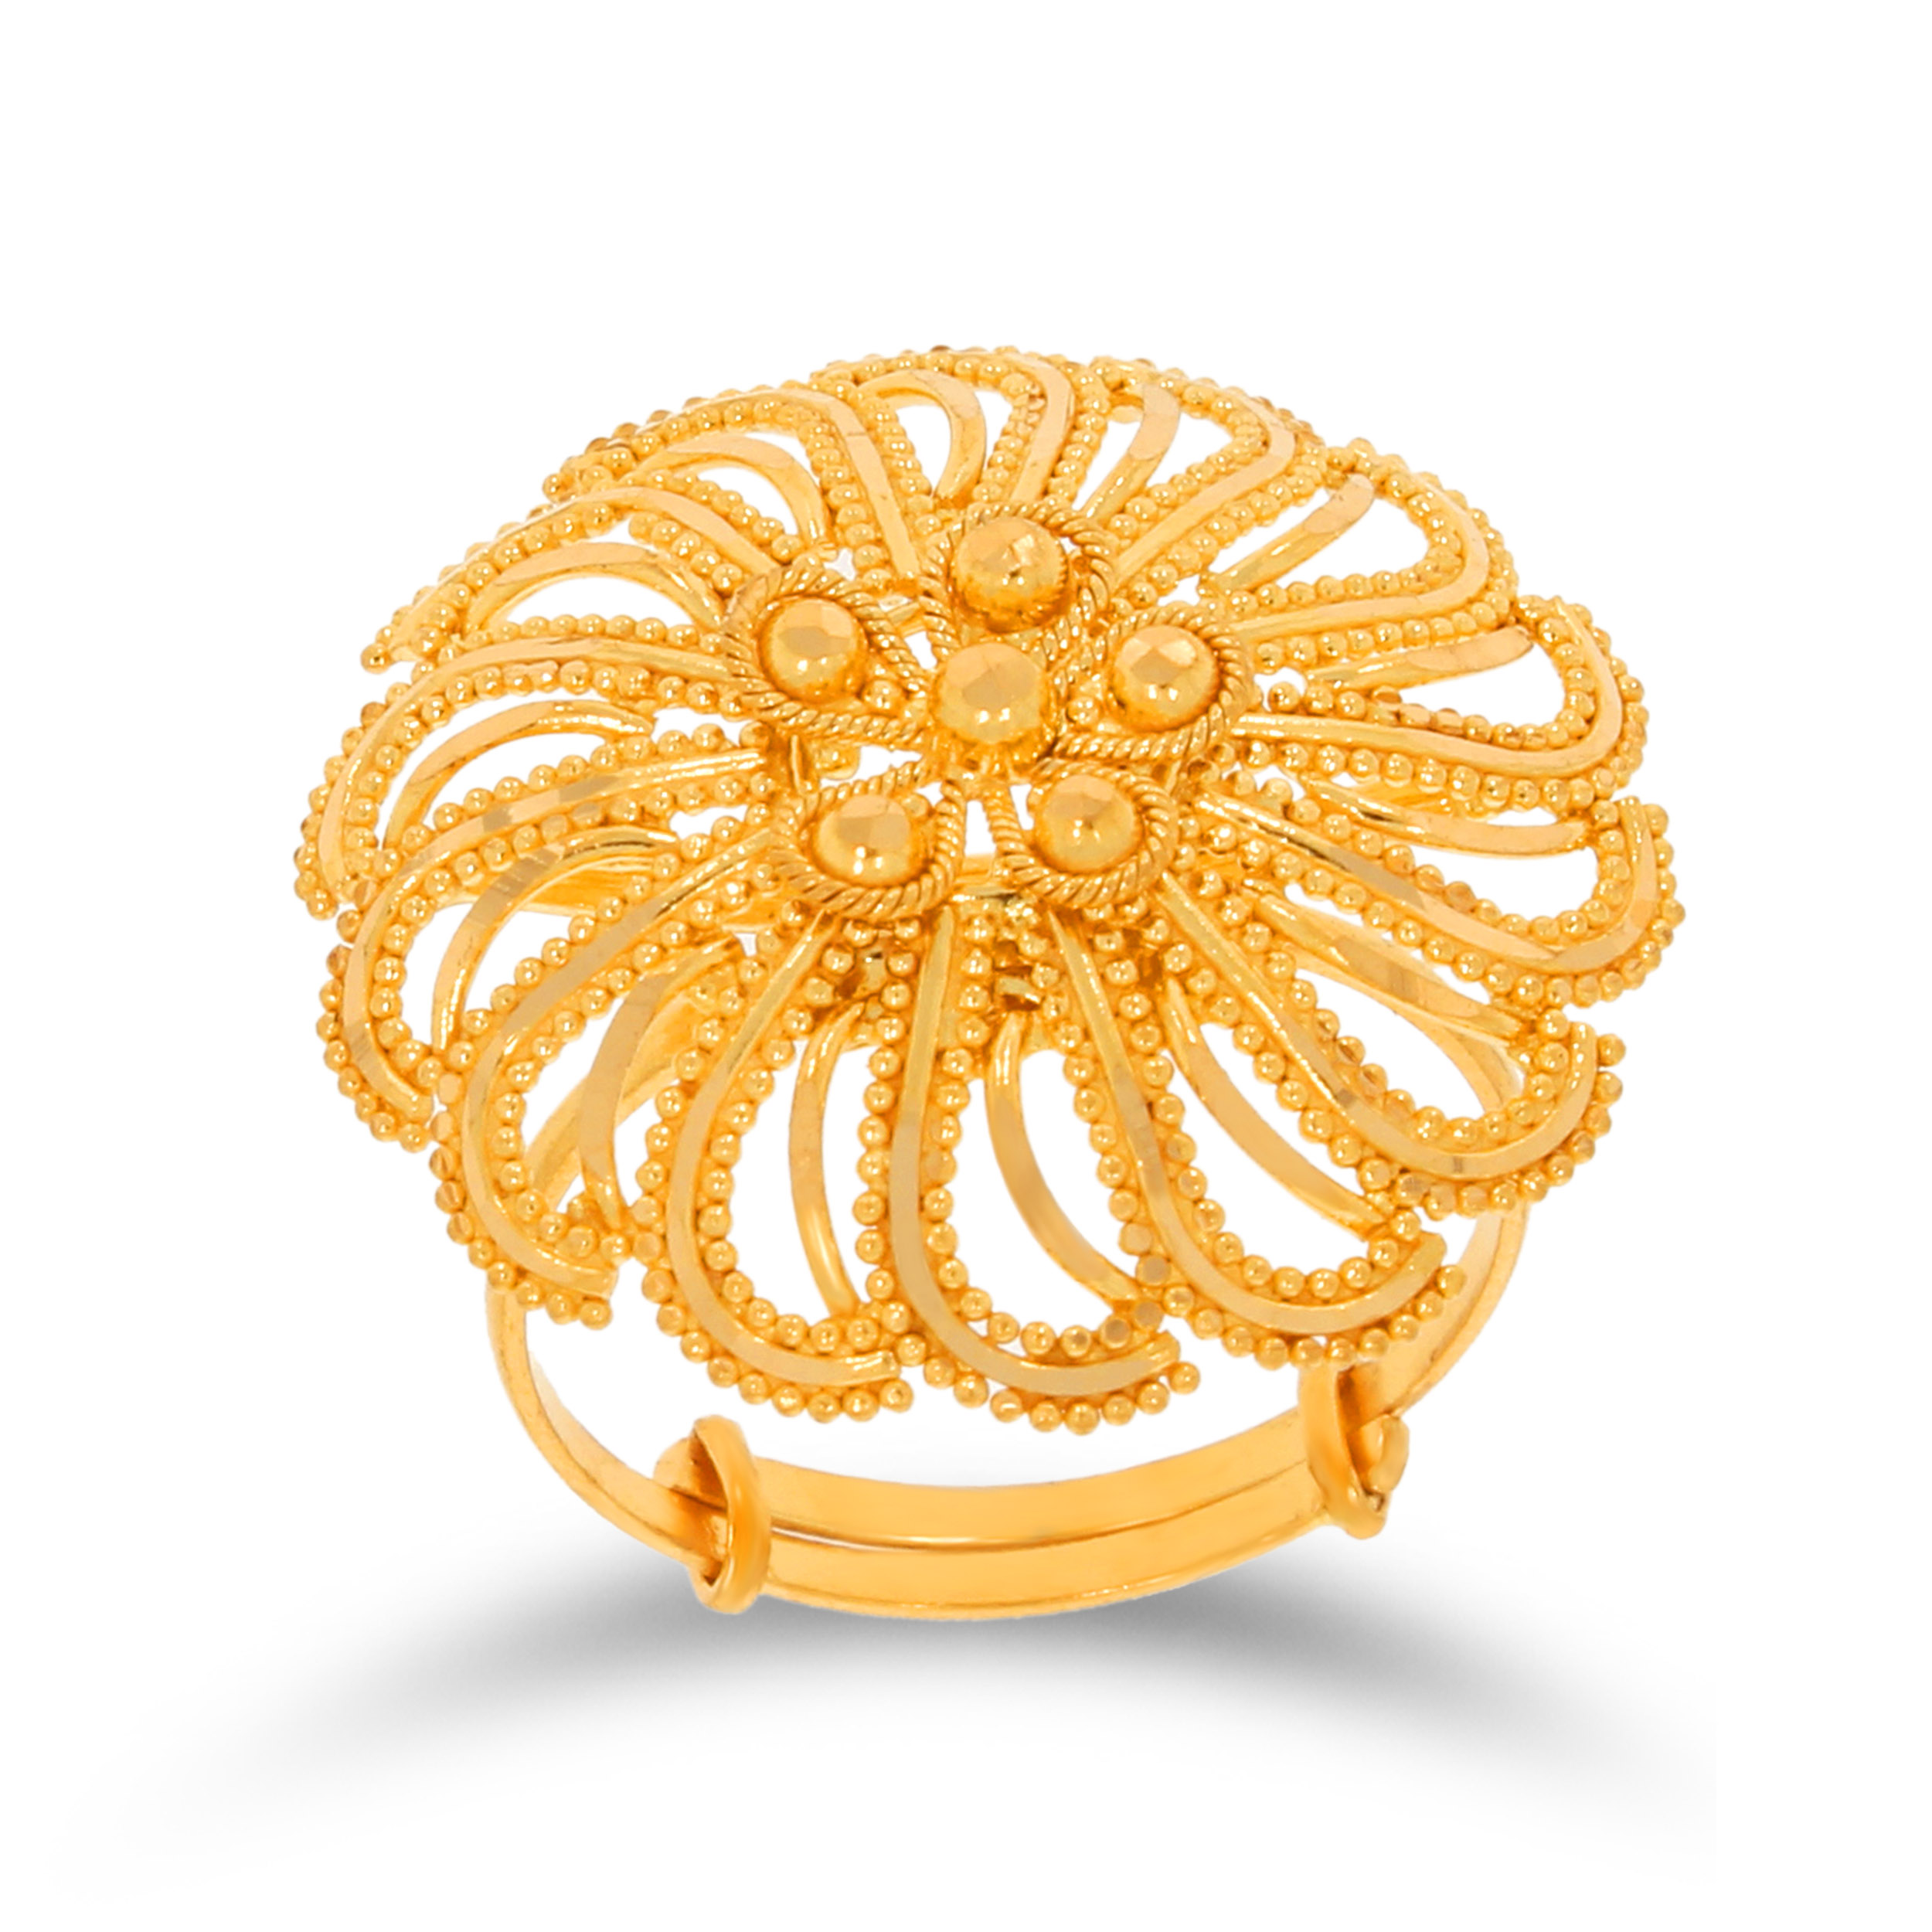 SEVI  AABI JEWELS 22CT  BIS HALLMARK GOLD RING FOR  WOMEN